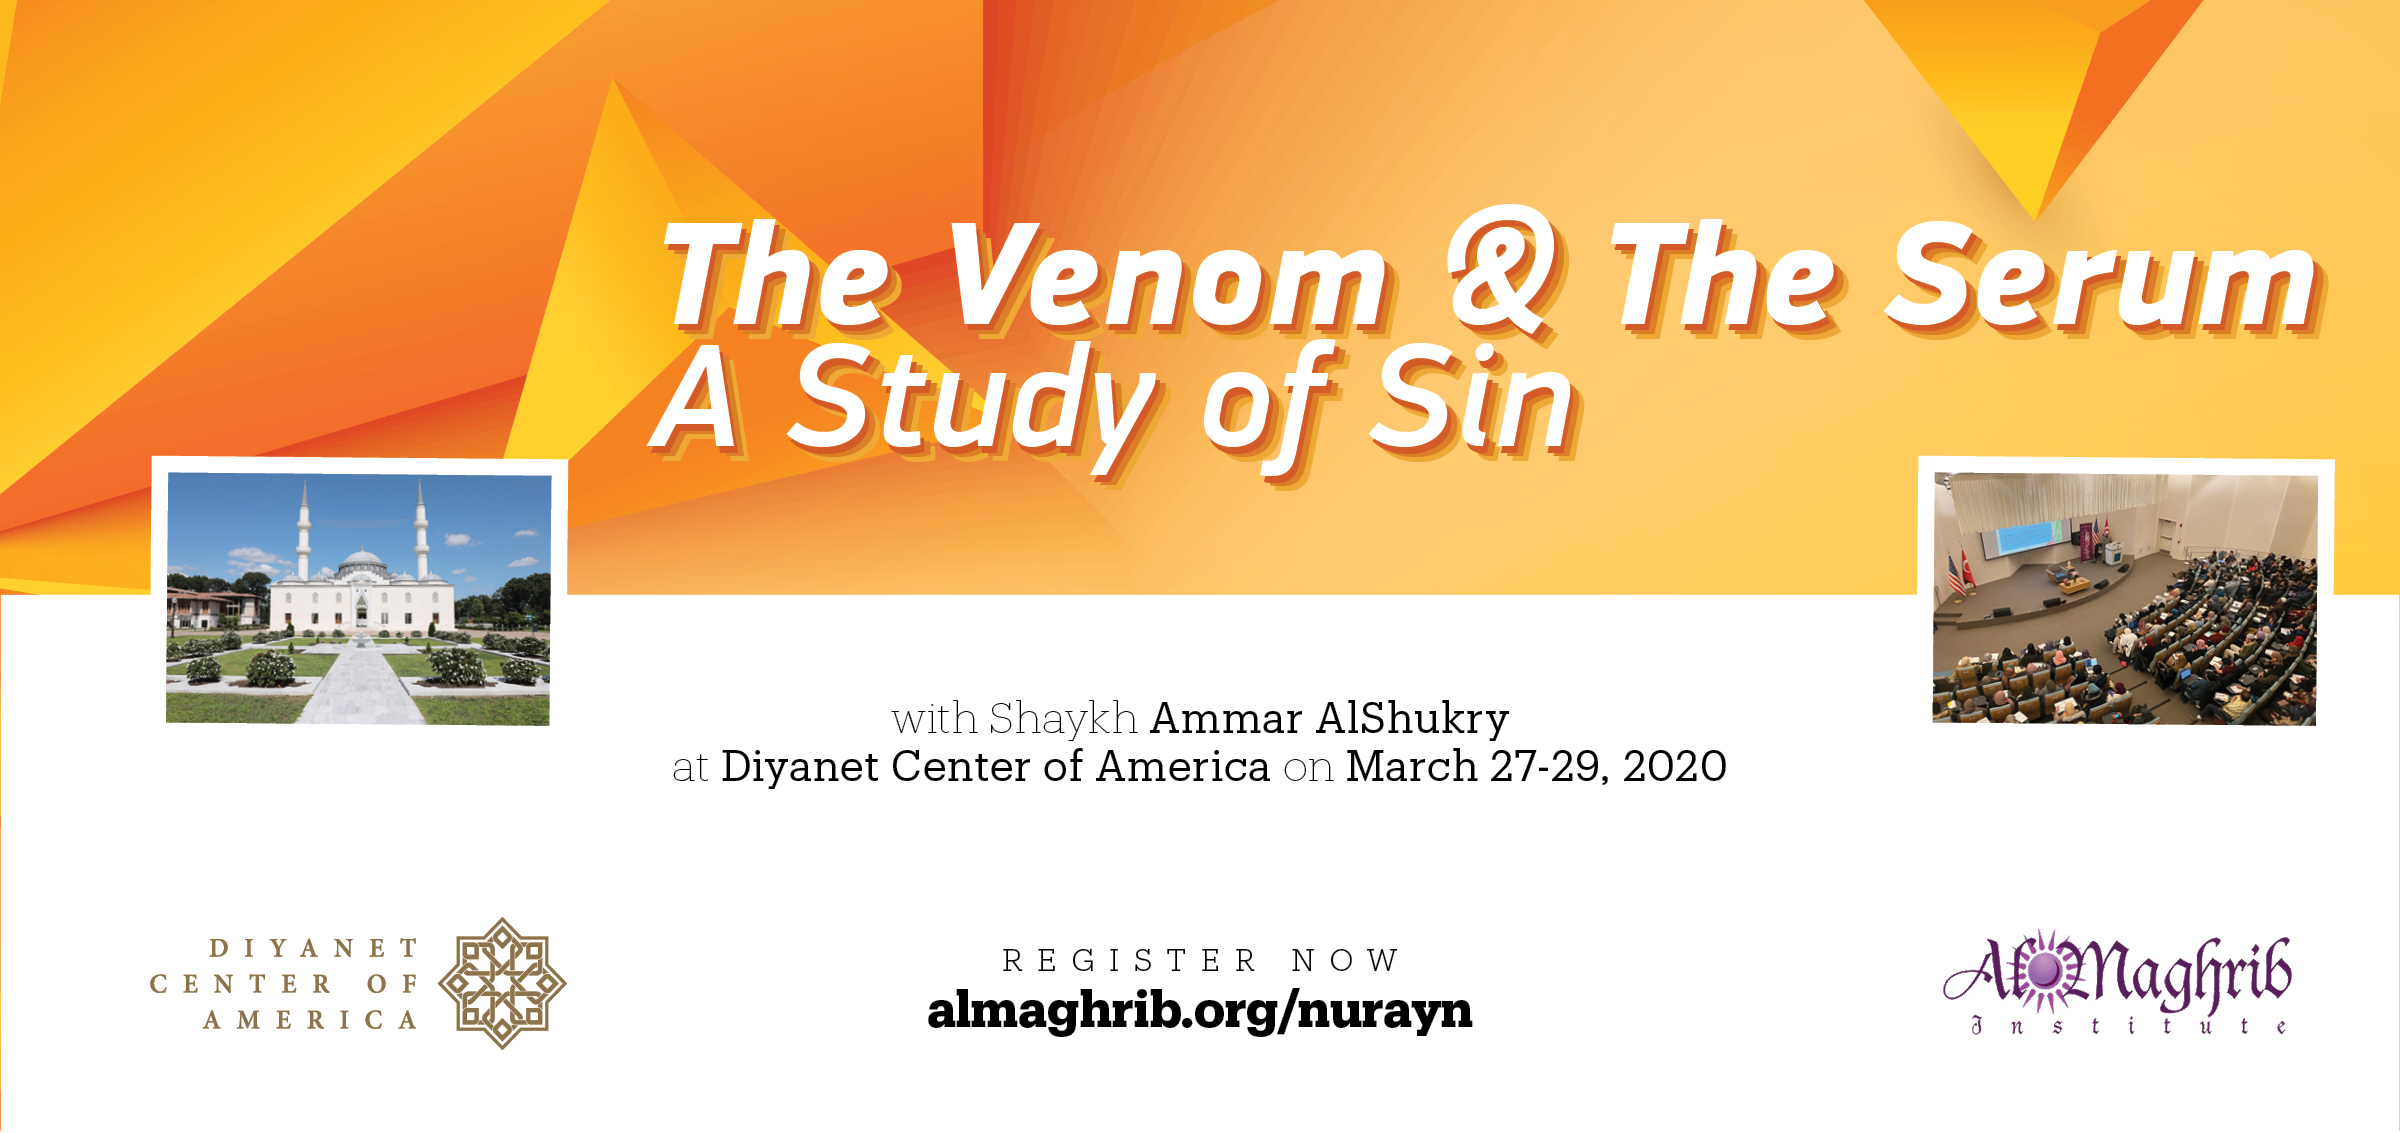 The Venom & The Serum: A Study of Sin Conference